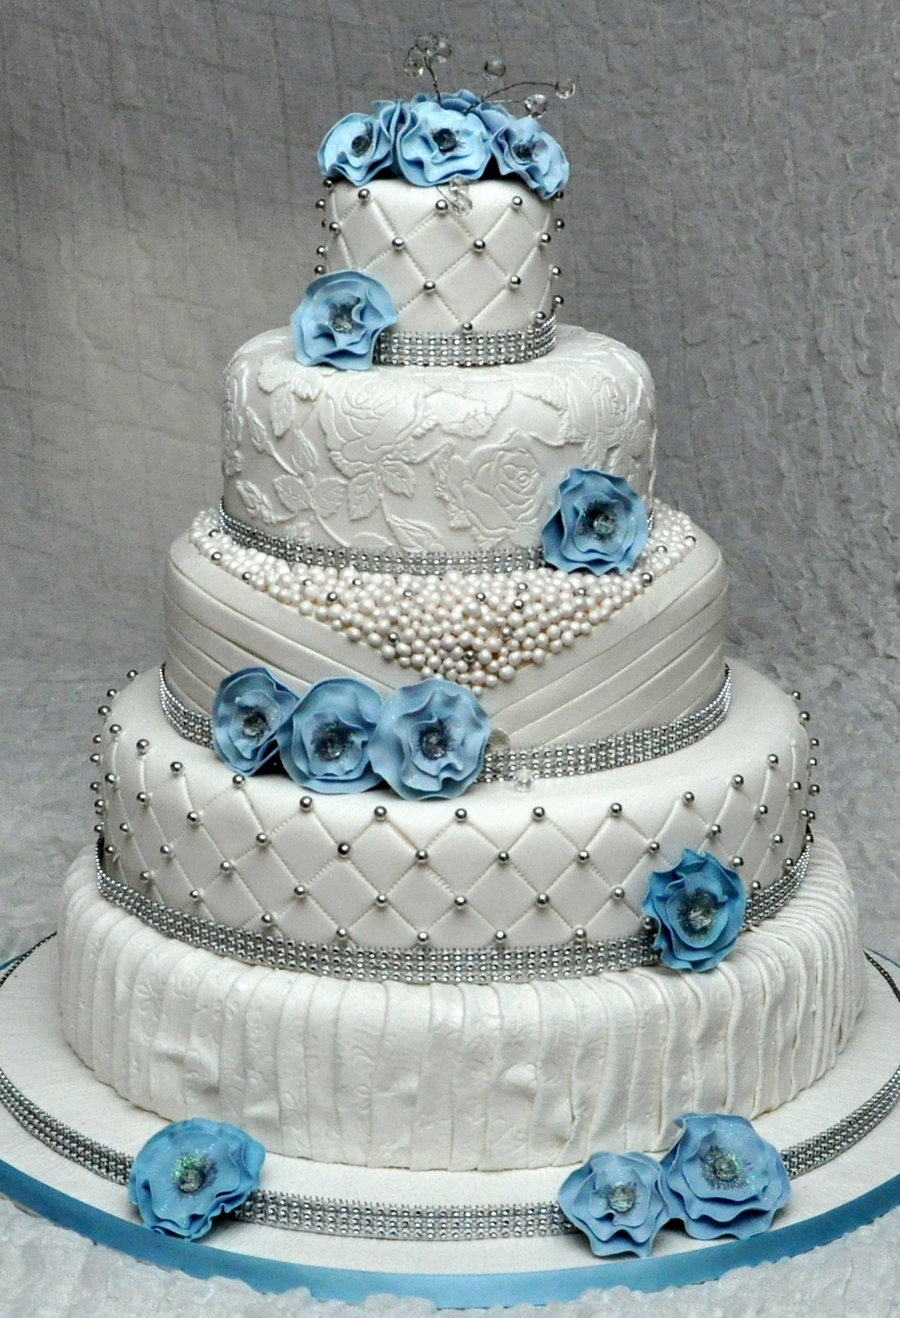 Wedding Cake with Pearls and Flowers